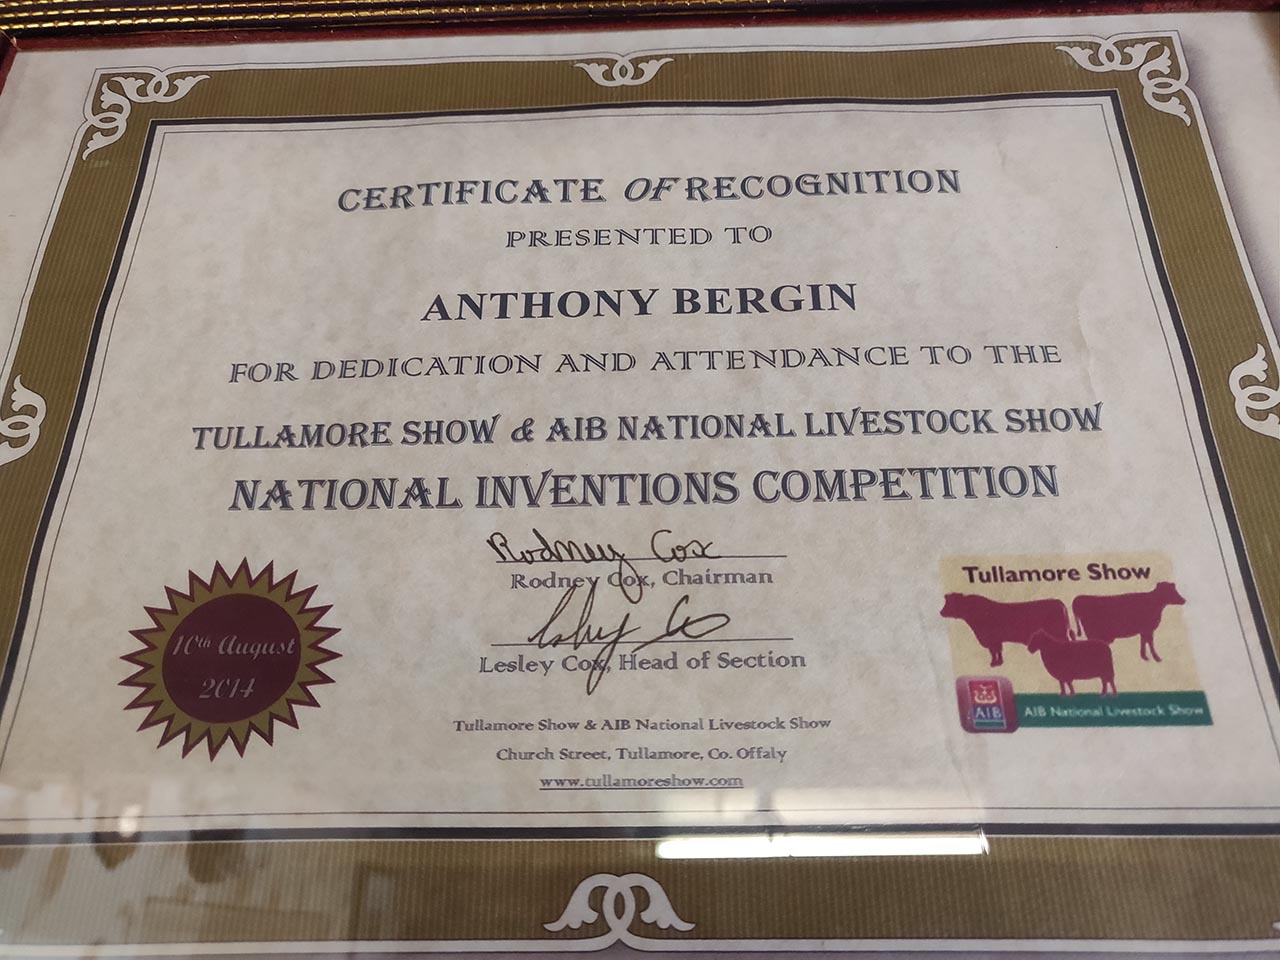 Tony Bergin Certificate of Recognition from Tullamore Show